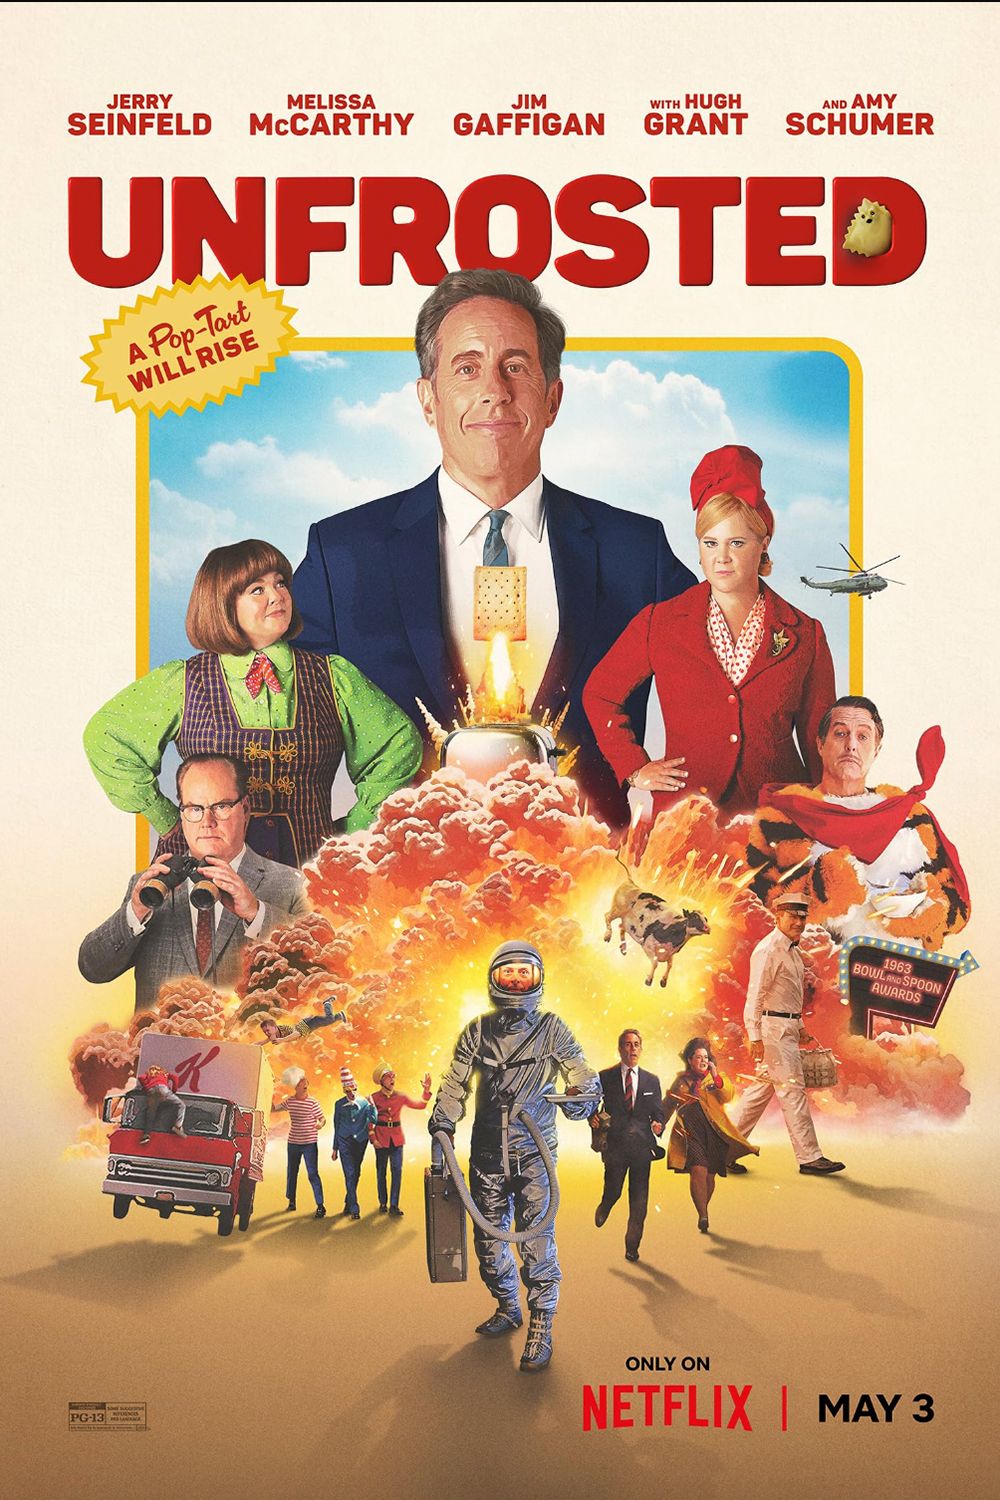 Unfrosted Movie Poster Showing Jerry Seinfeld, Melissa McCarthy, Jim Gaffigan, Hugh Grant, and Amy Schumer standing by an Explosion and a Flying Cow